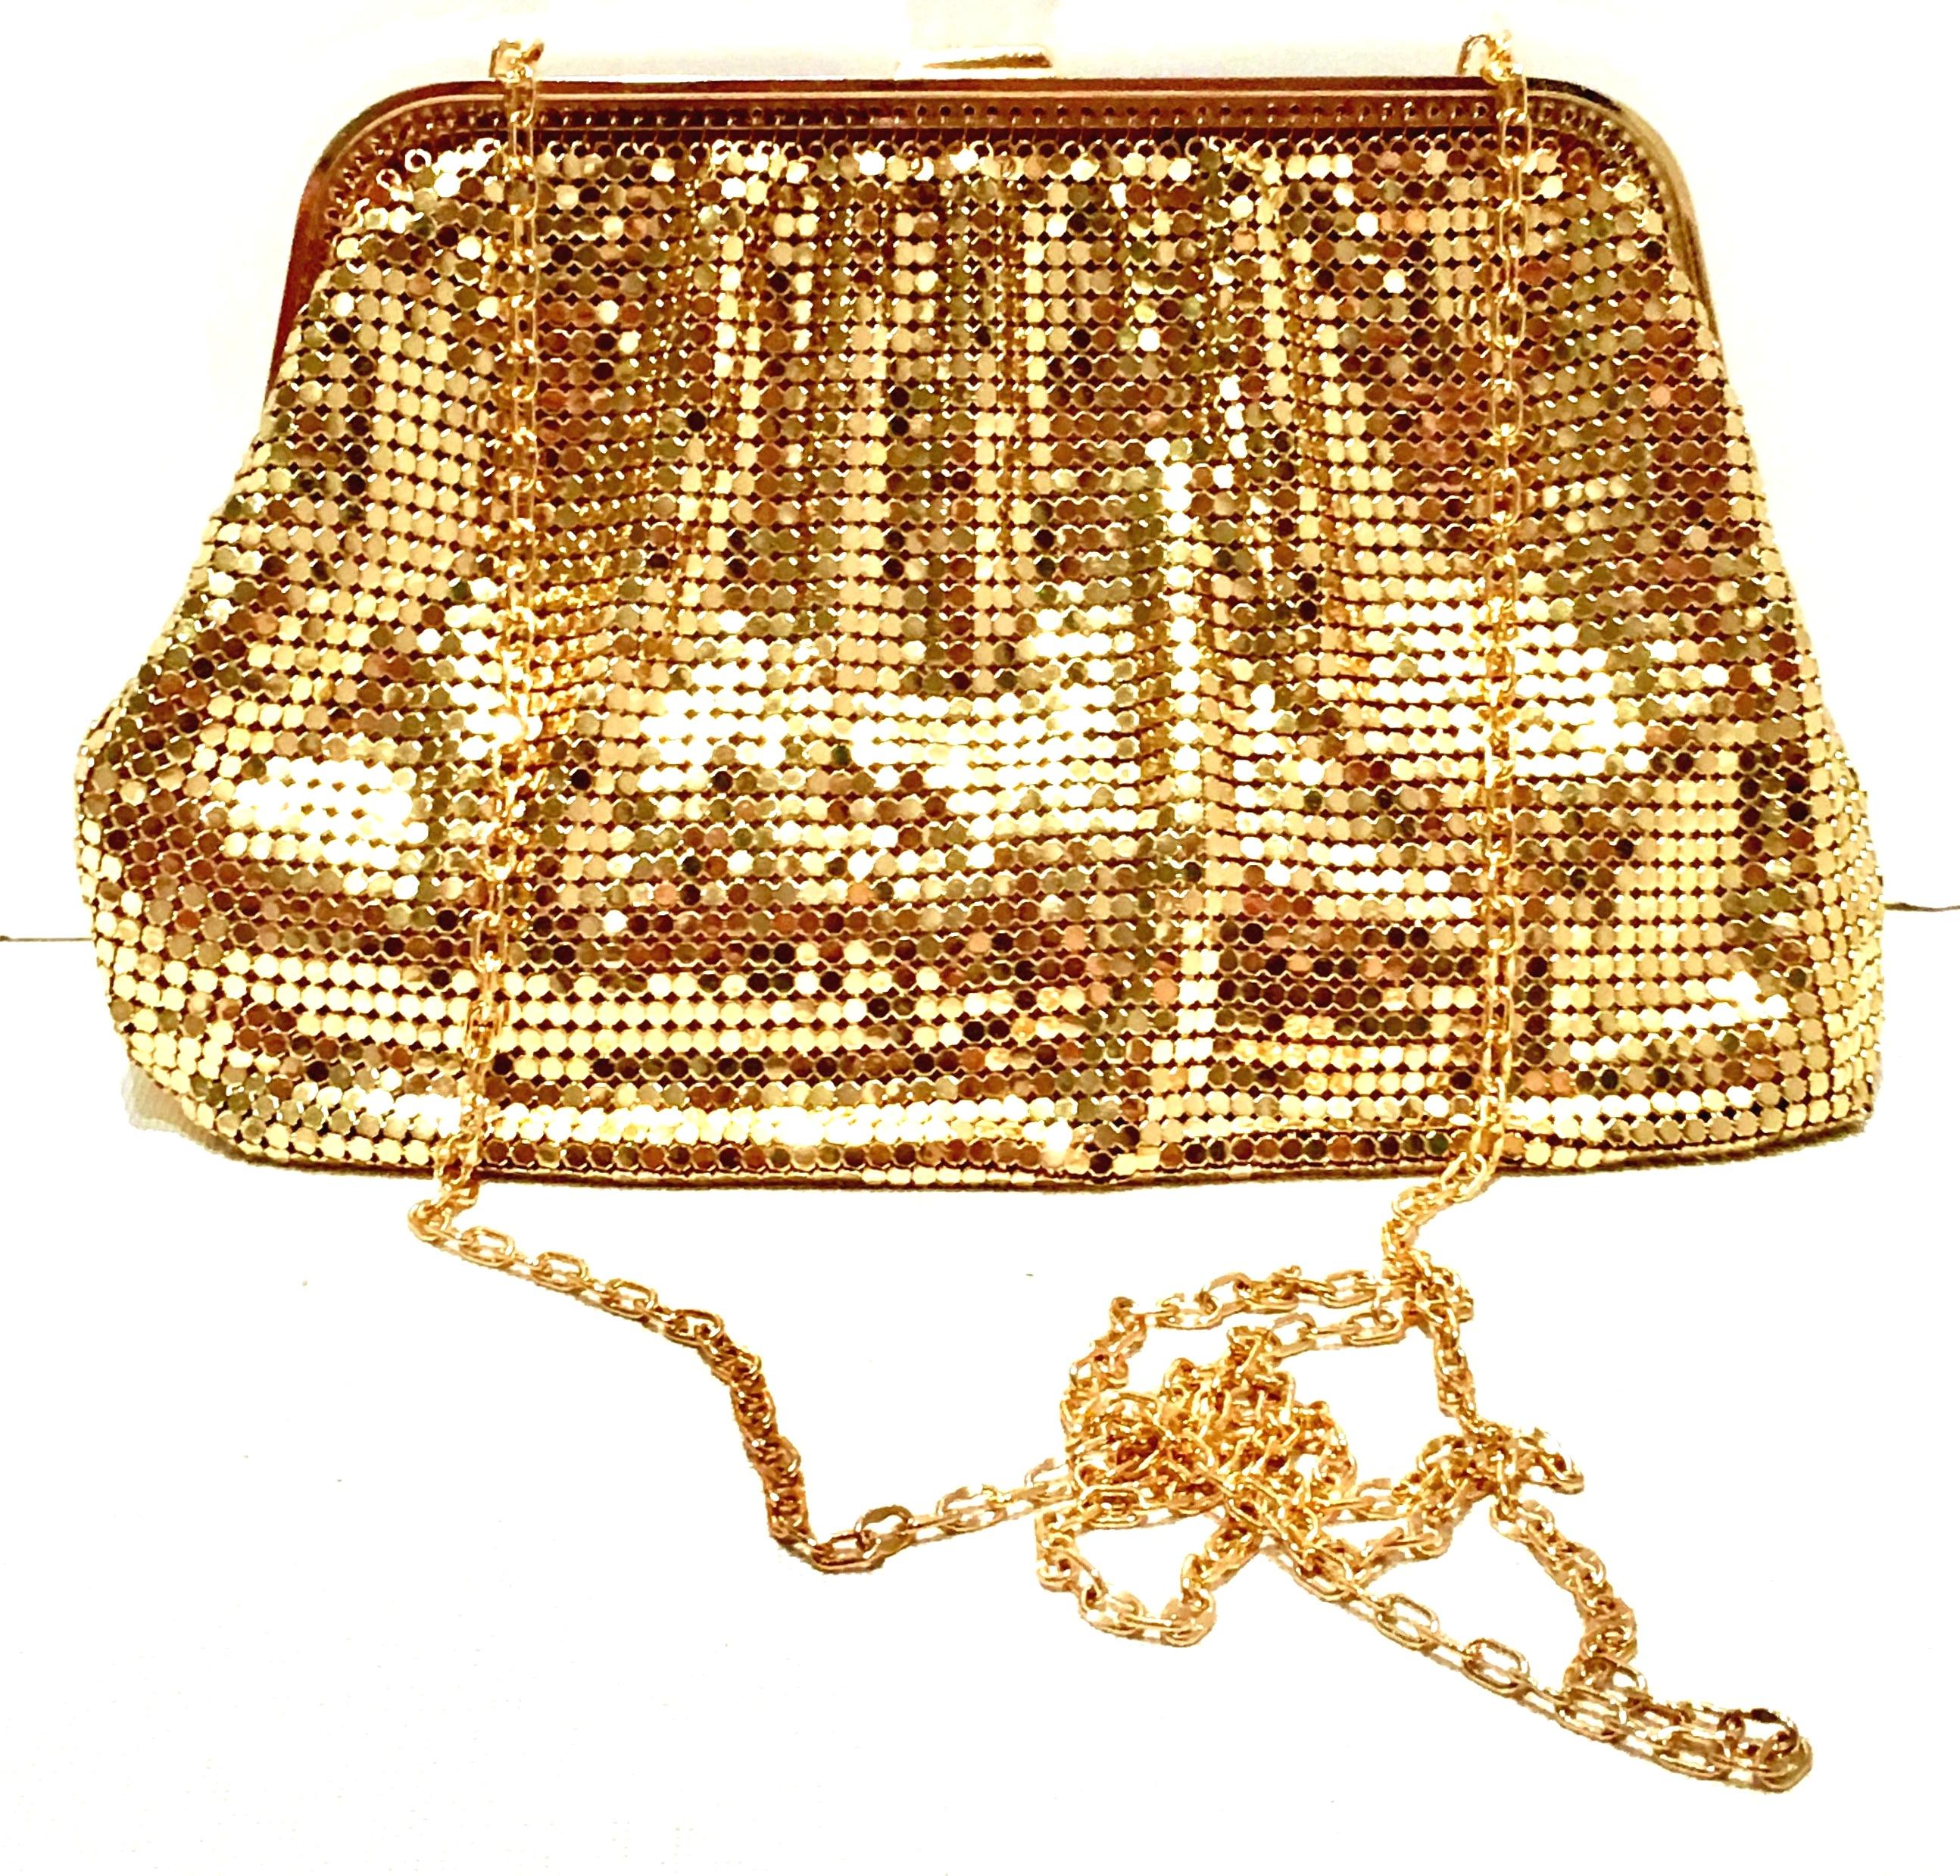 20th Century Gold Metal Mesh & Swarovksi Crystal Evening Bag By, Whiting & Davis For Sale 1